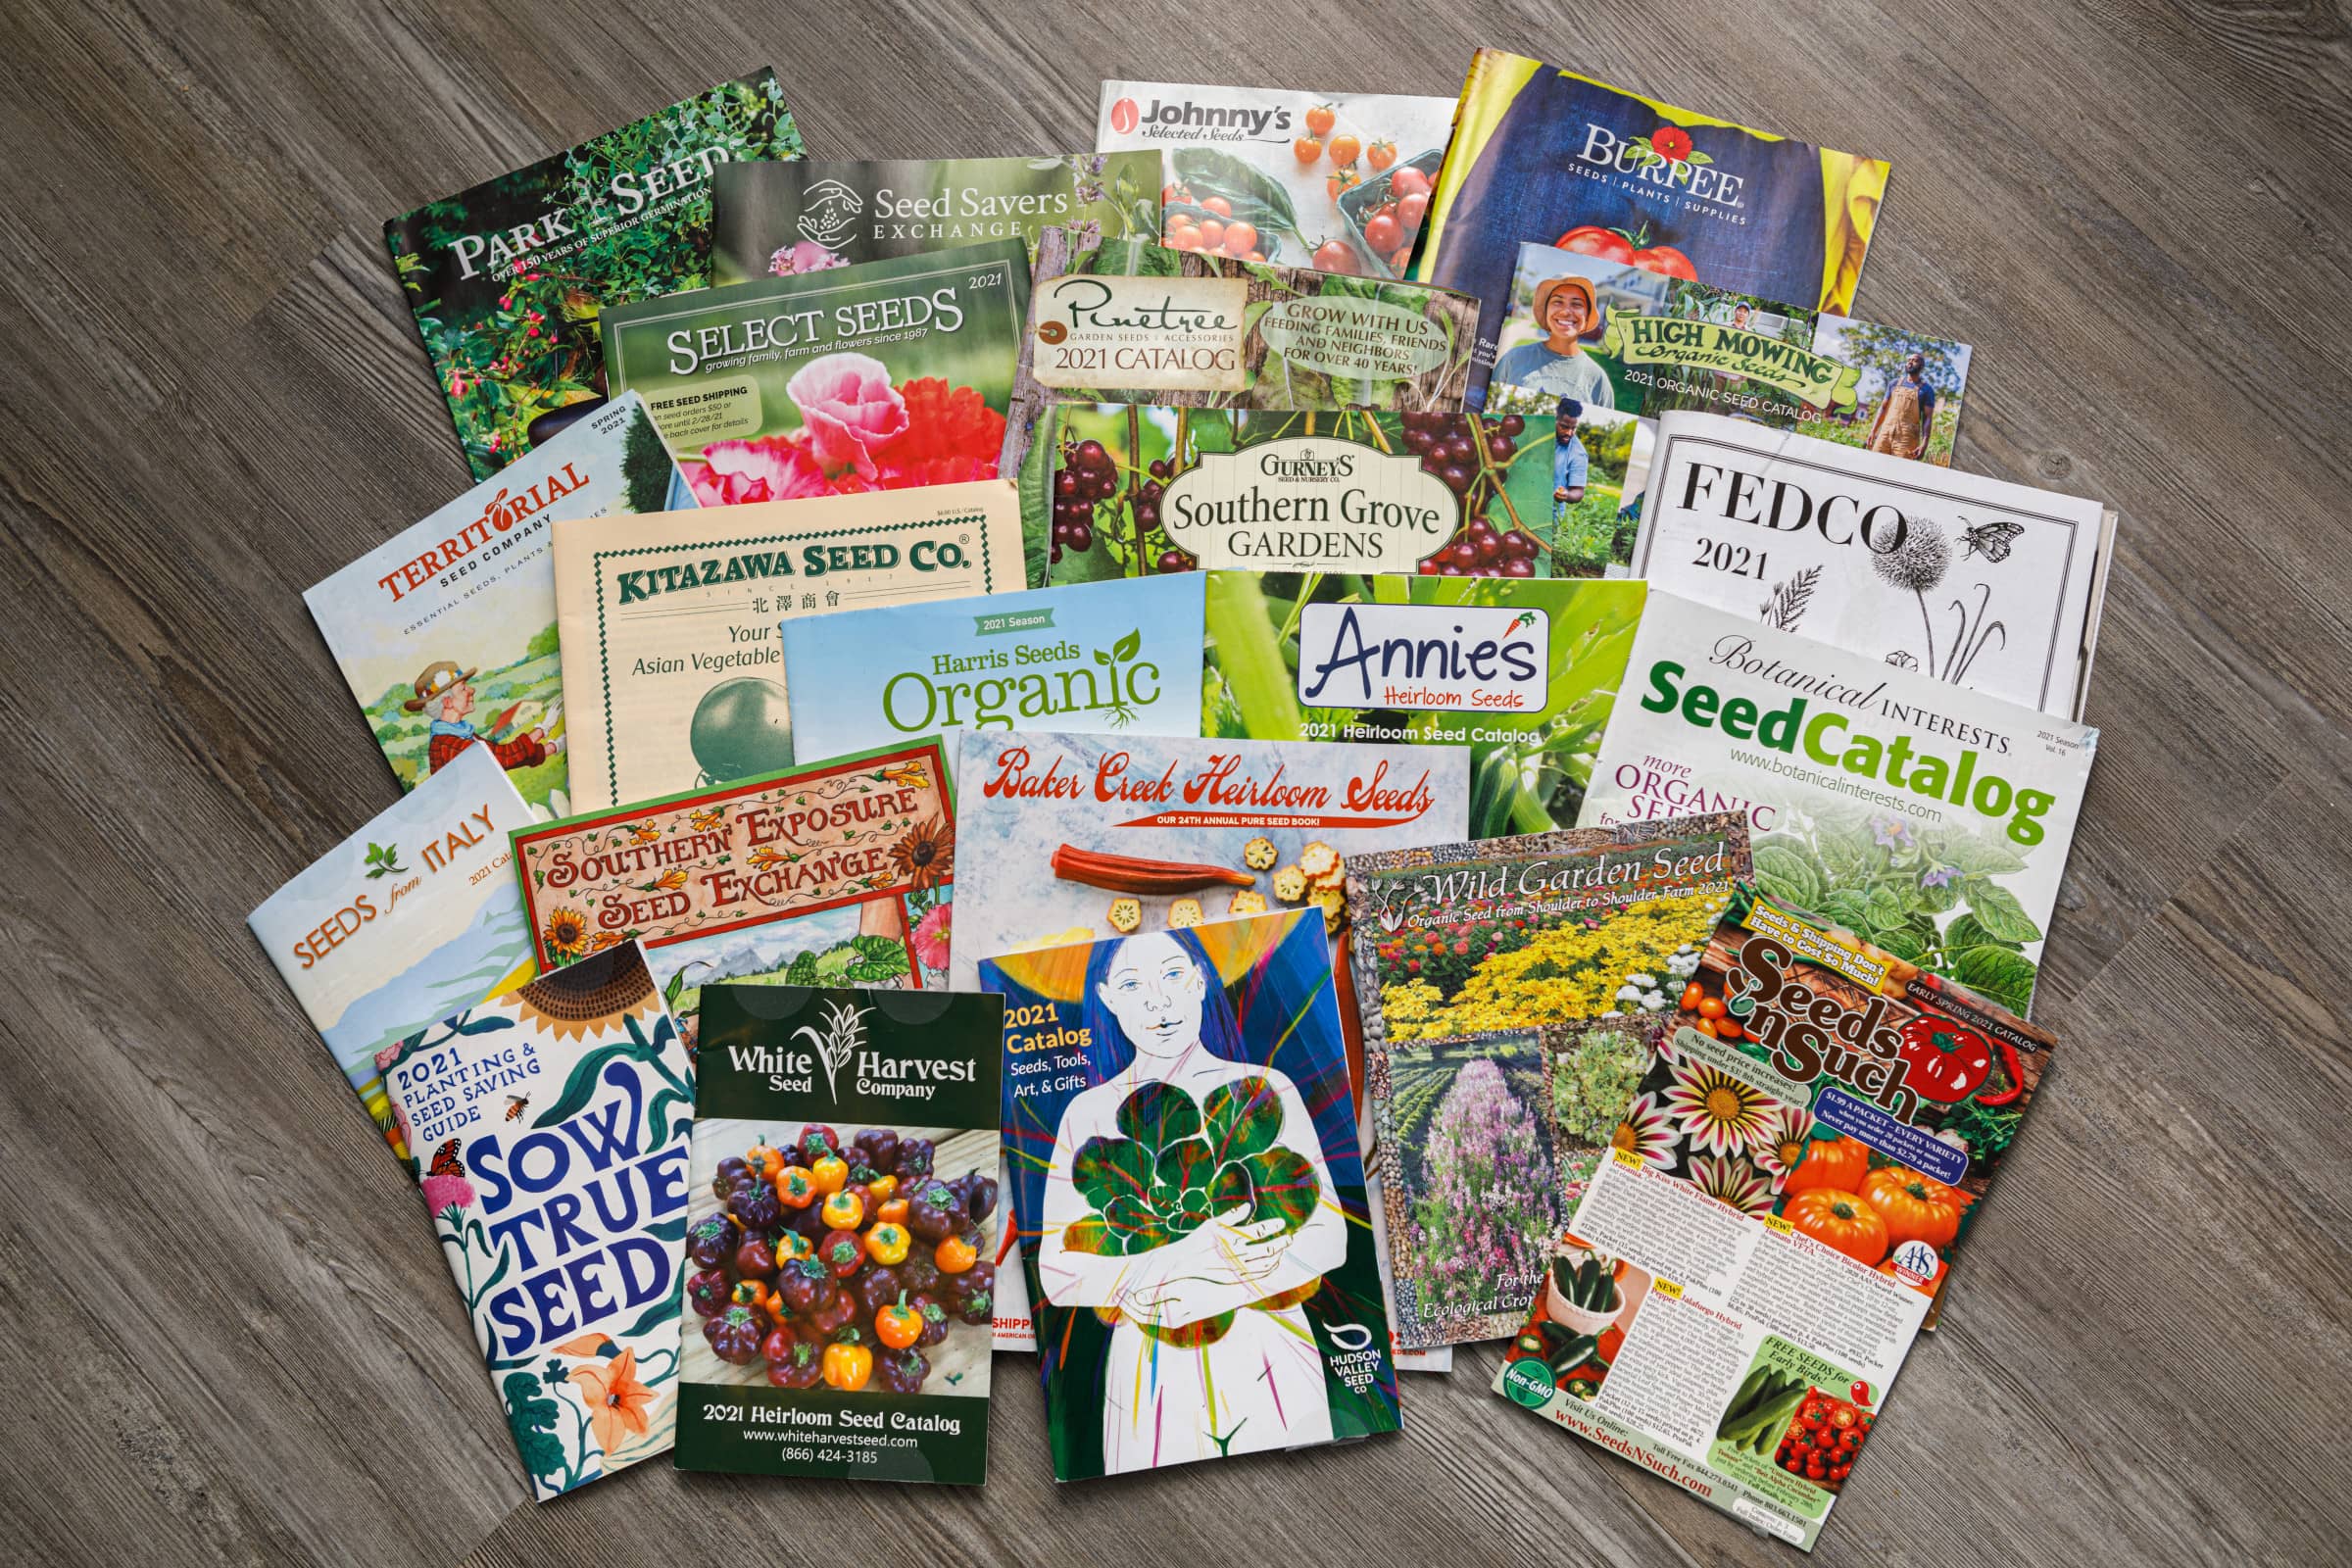 6 Best Seed Catalogs for Organic, Heirloom, NonGMO Vegetables Clean